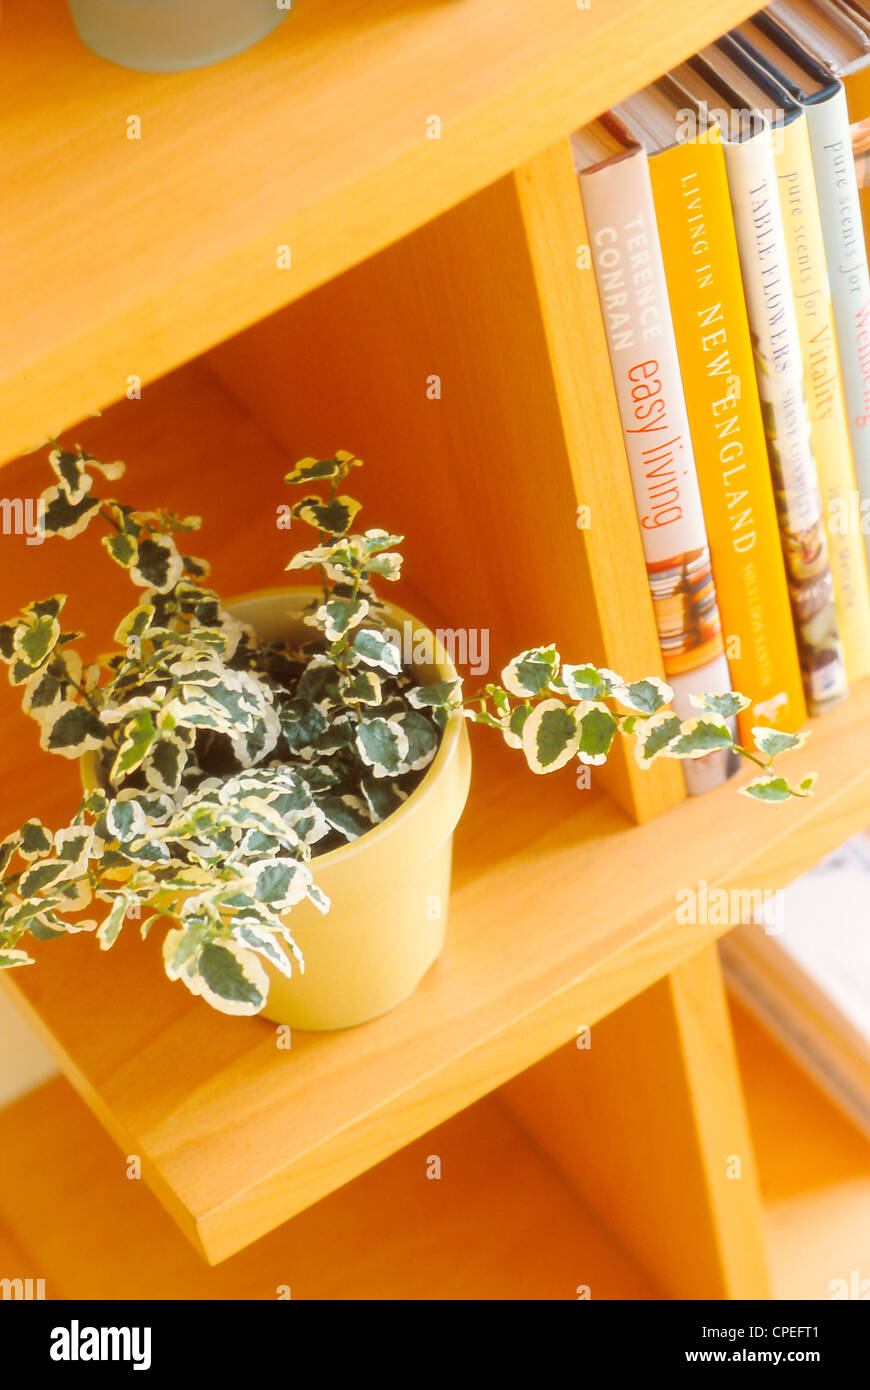 Potted Plant And Books In Rack Stock Photo